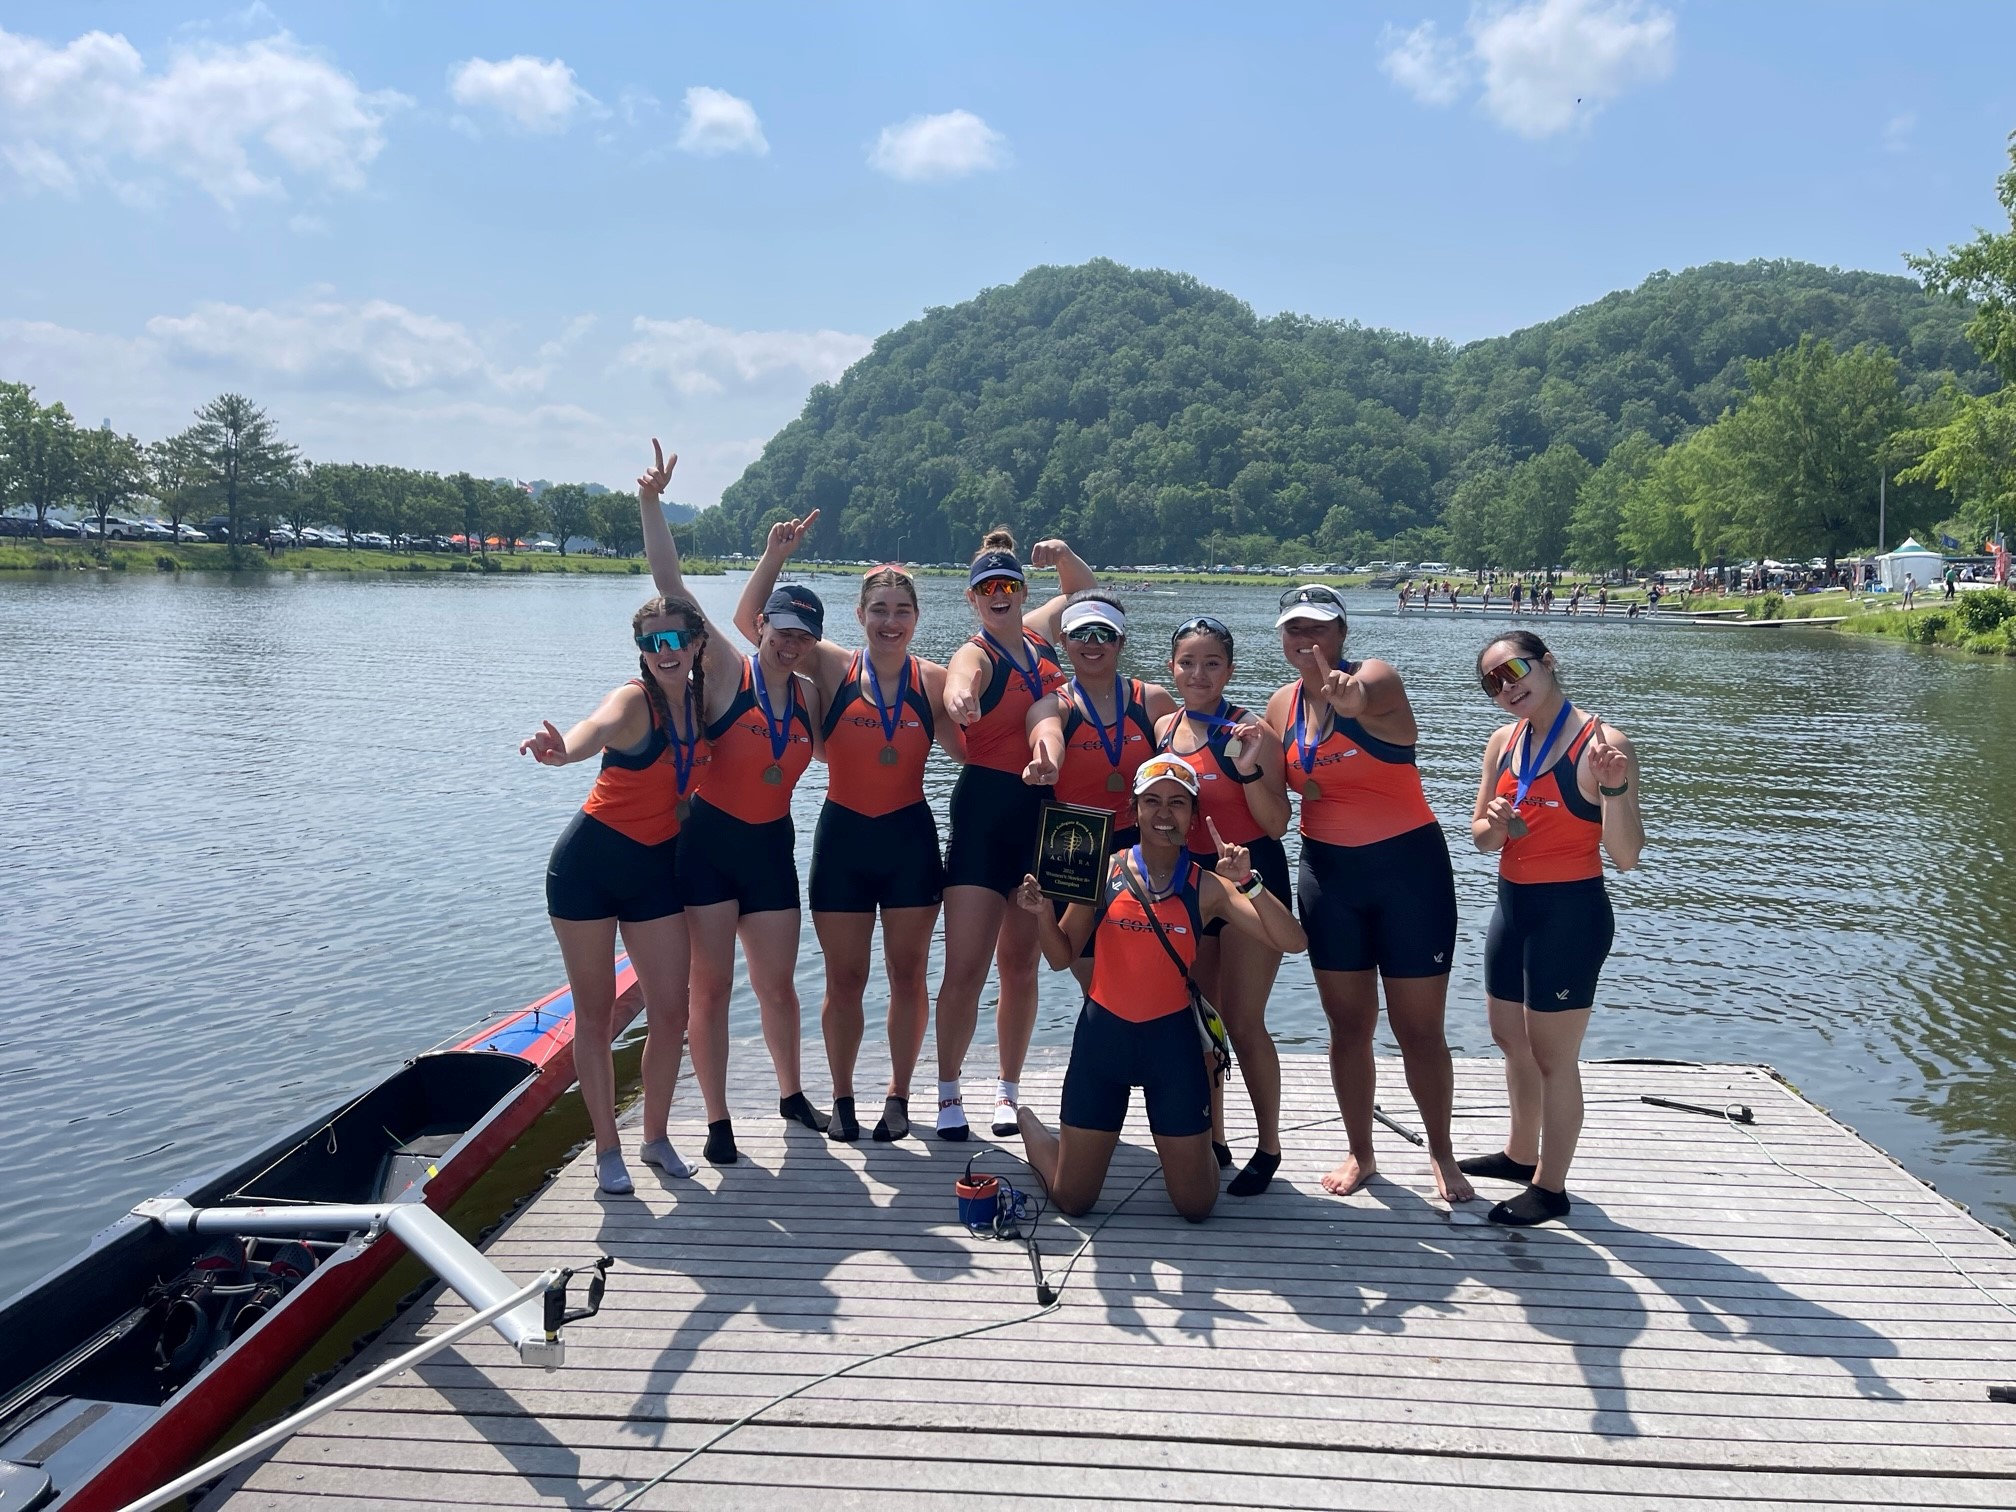 Pirate rowers capture national championship at ACRA